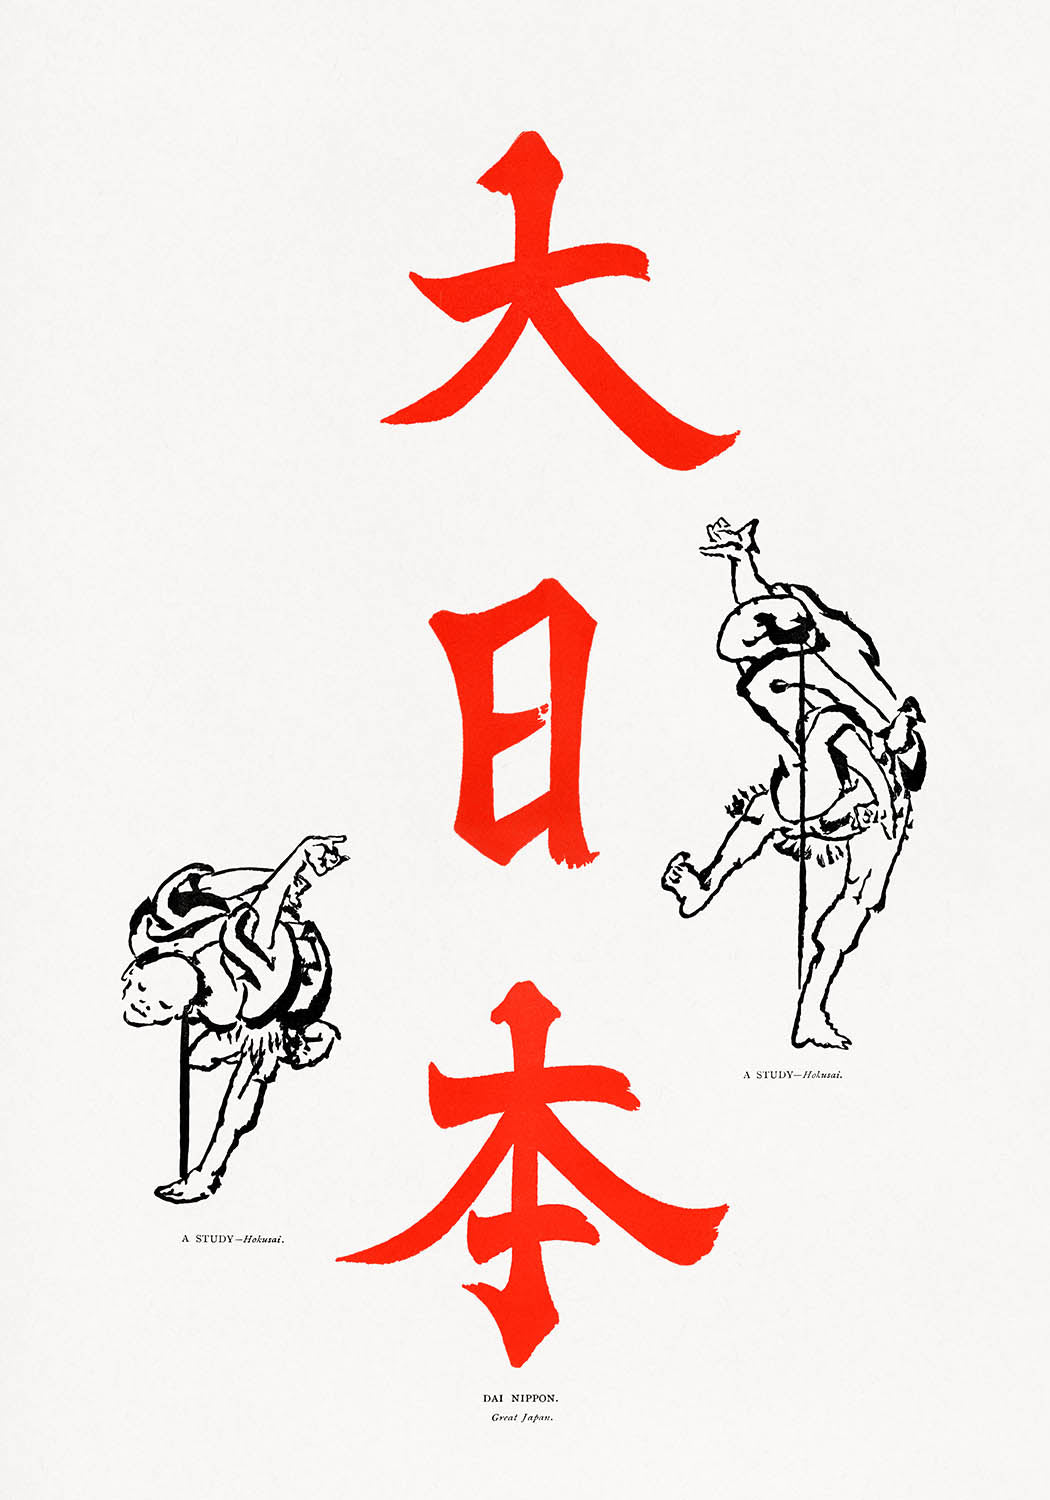 A poster with three large red kanji characters that read "大日本," meaning "Great Japan," set against a white background. Two black and white illustrations of traditional Japanese figures in movement flank the kanji, with the text "A STUDY-Hikaku" on the left and "DAI NIPPON Great Japan" at the bottom, evoking a vintage Japanese aesthetic.